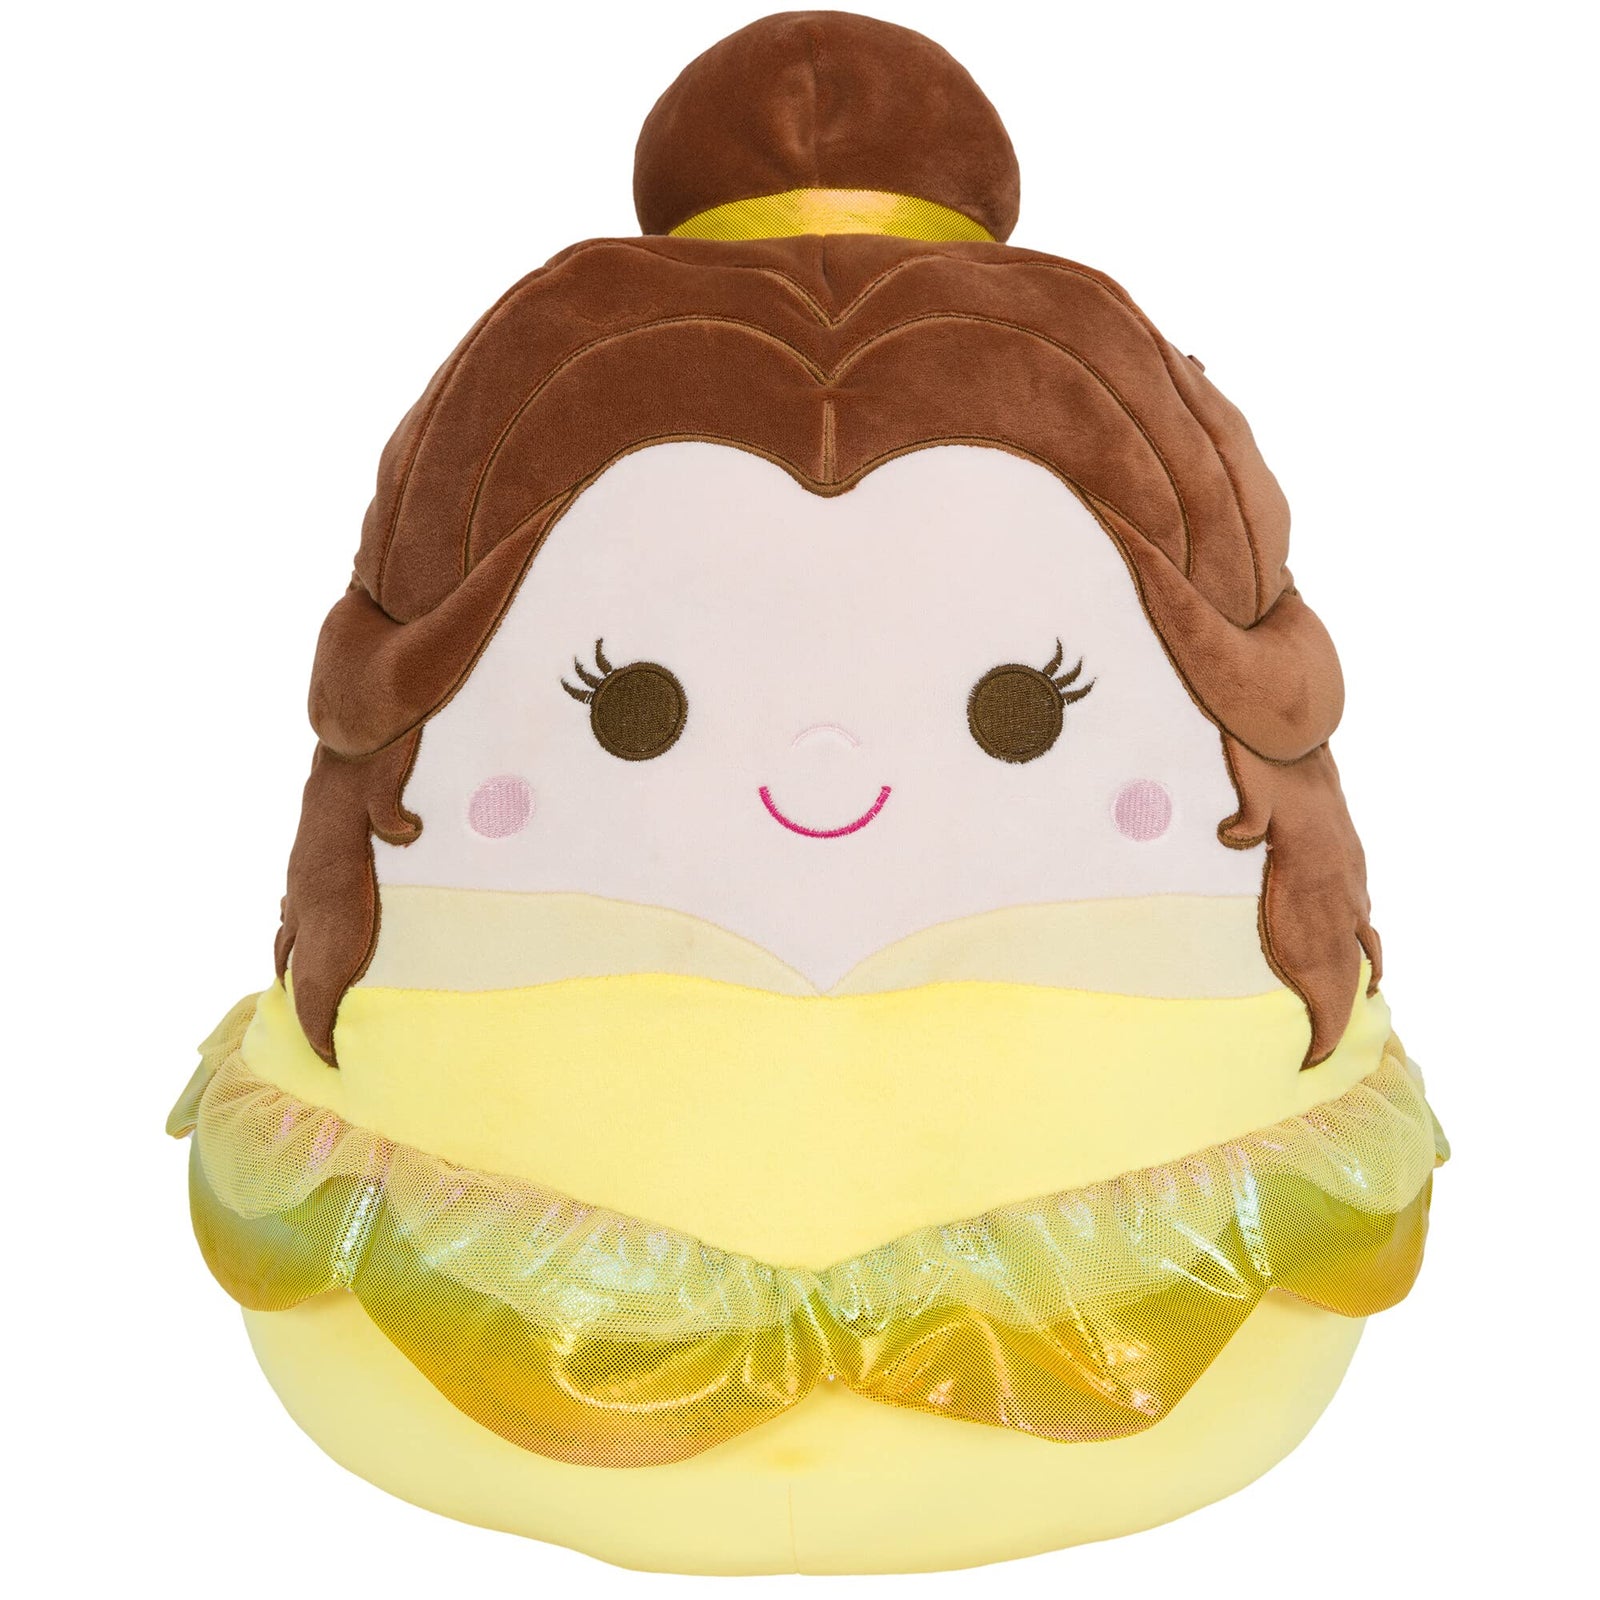 Squishmallow Disney 14-Inch Belle with Sequins - Ultrasoft Stuffed Animal Plush Toy, Official Kellytoy Plush - Amazon Exclusive